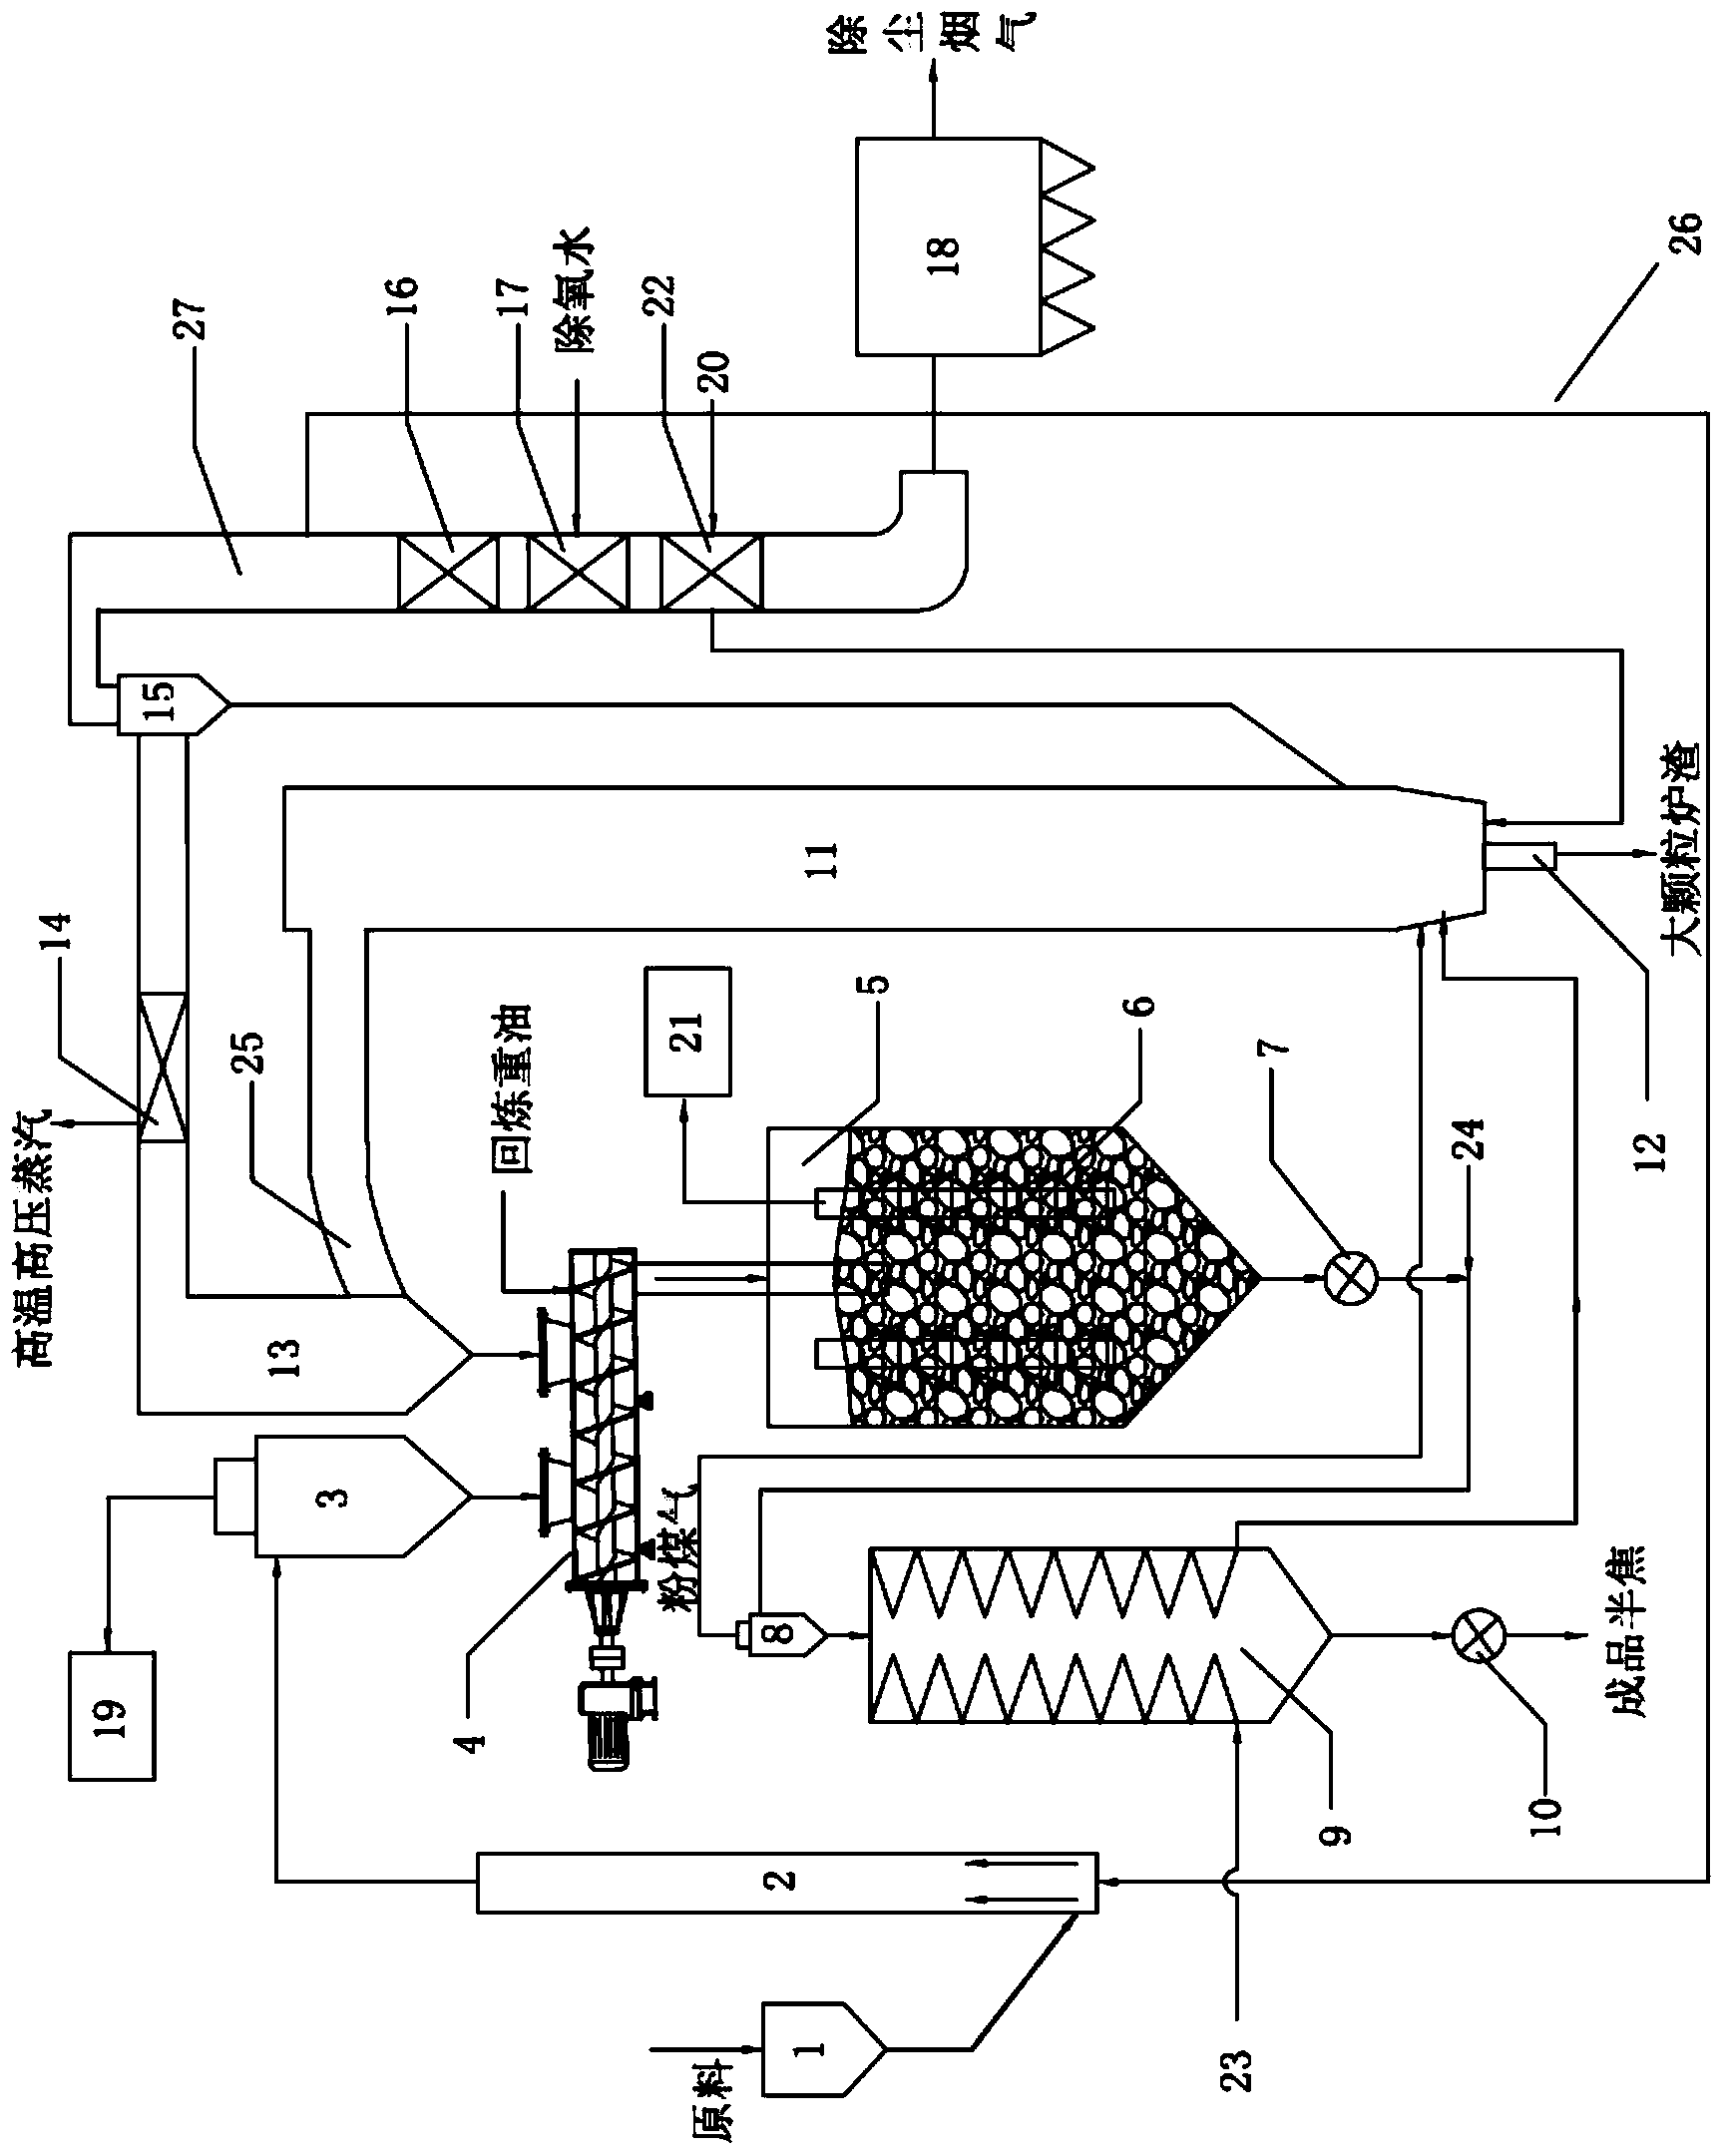 Method and system for low-temperature dry distillation and separation recycling of solid thermal carrier low-rank coal and oil shale